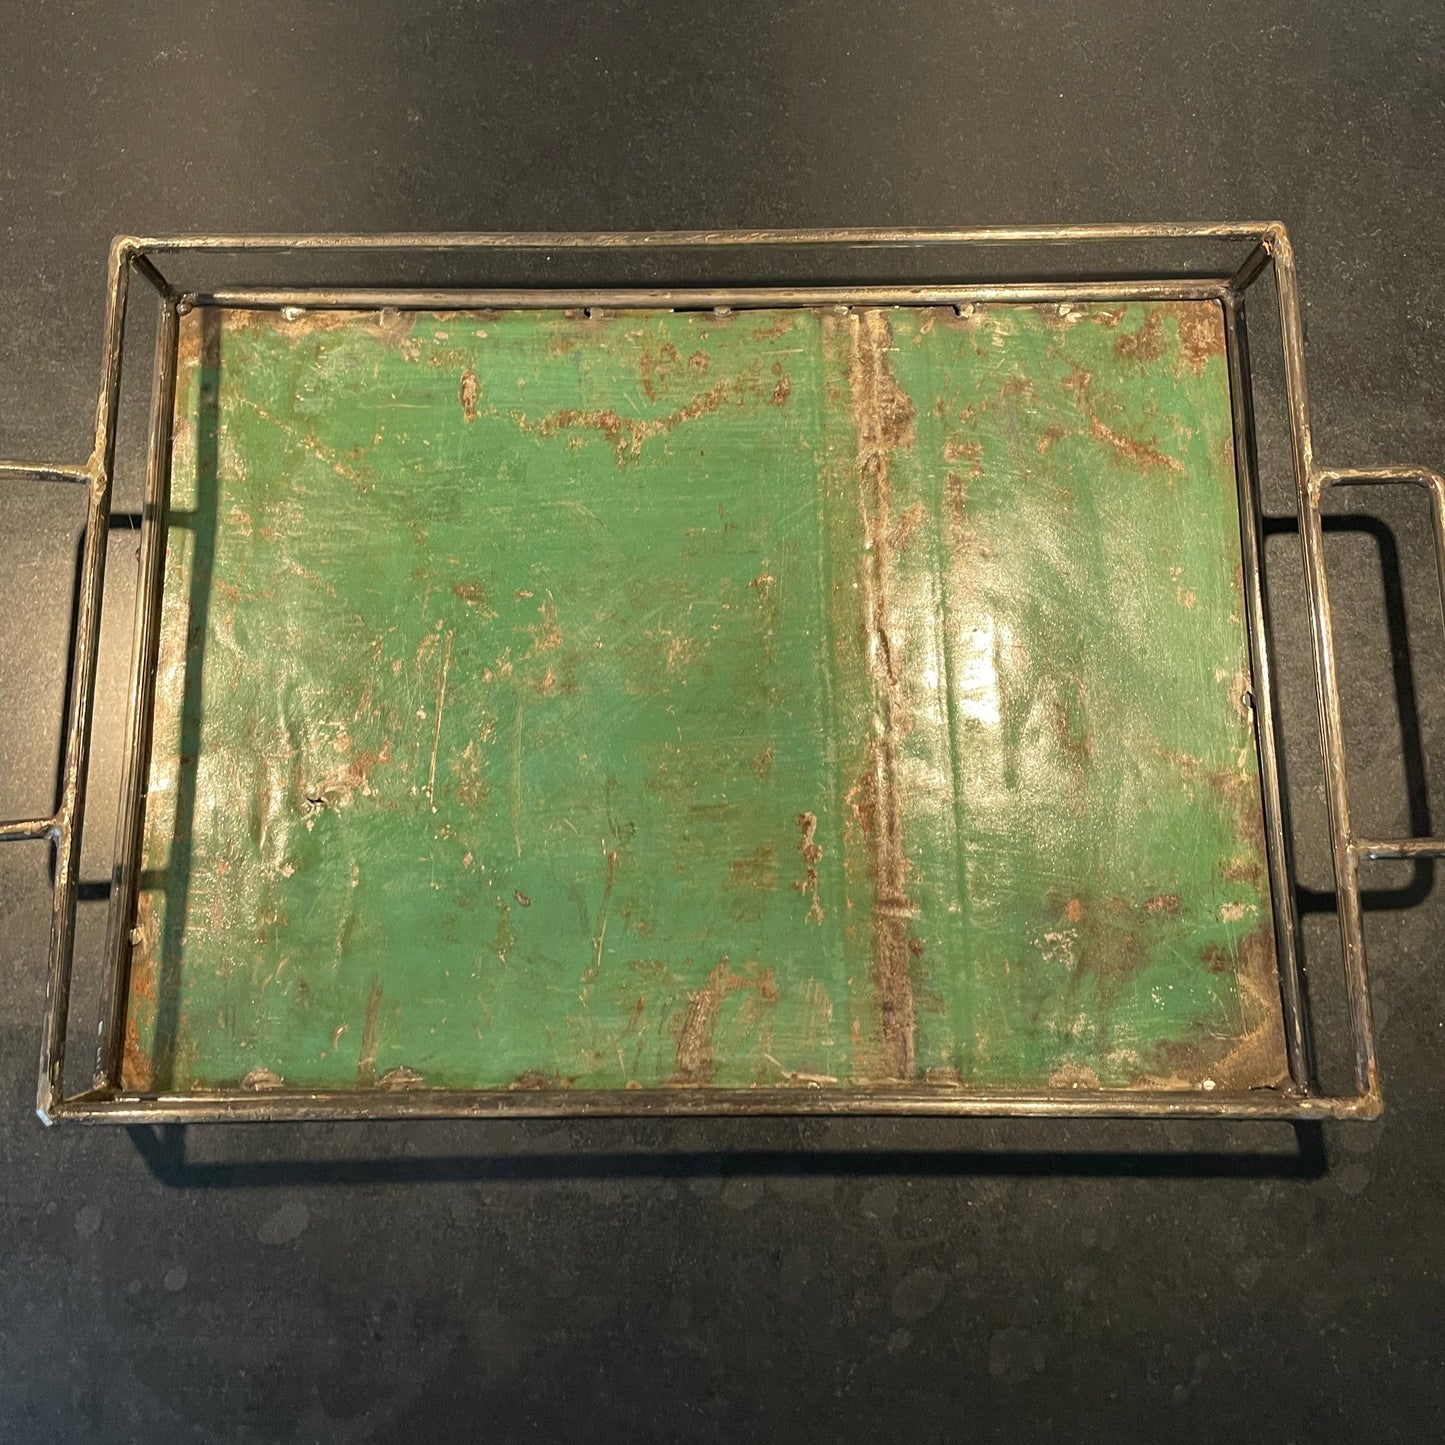 Serving tray in recycled metal. Handmade and Fair Trade from Burkina Faso